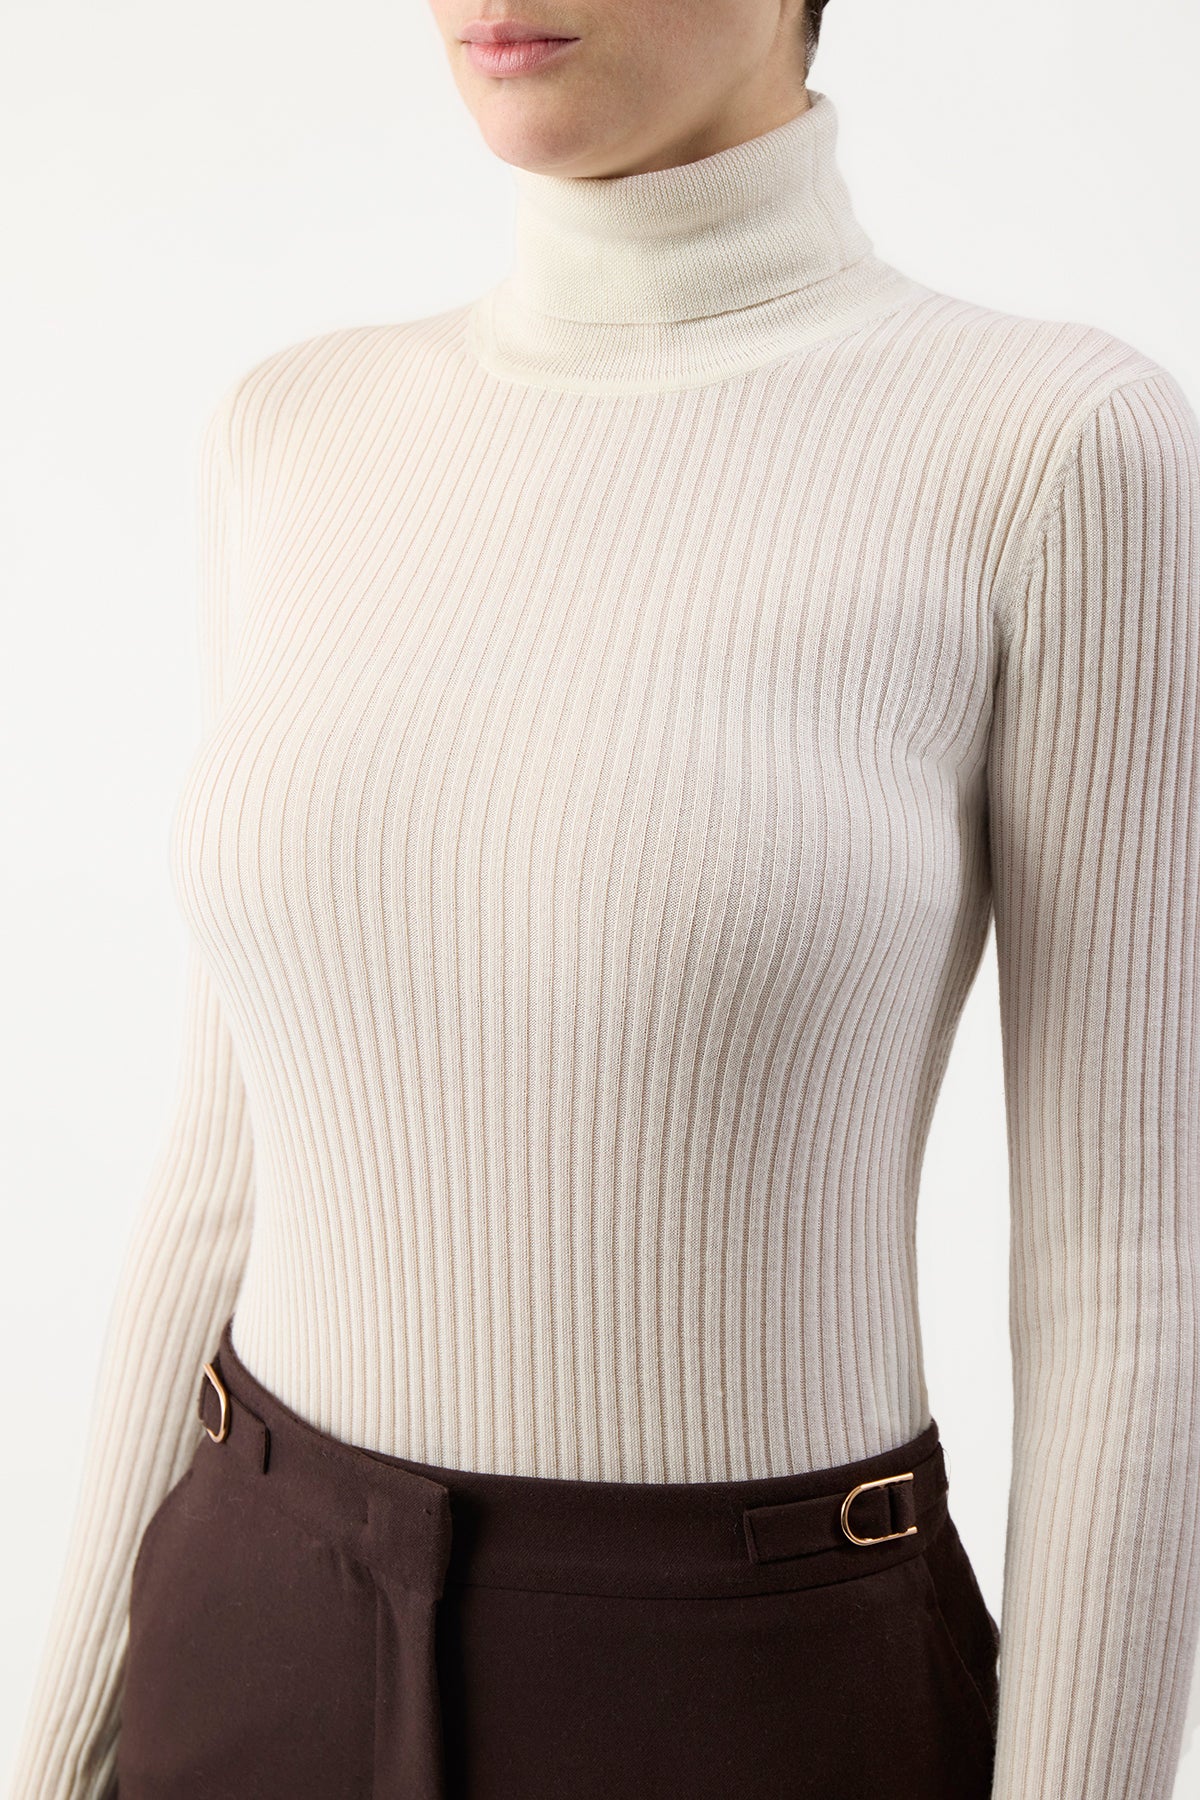 Peppe Knit Turtleneck in Ivory Cashmere Silk